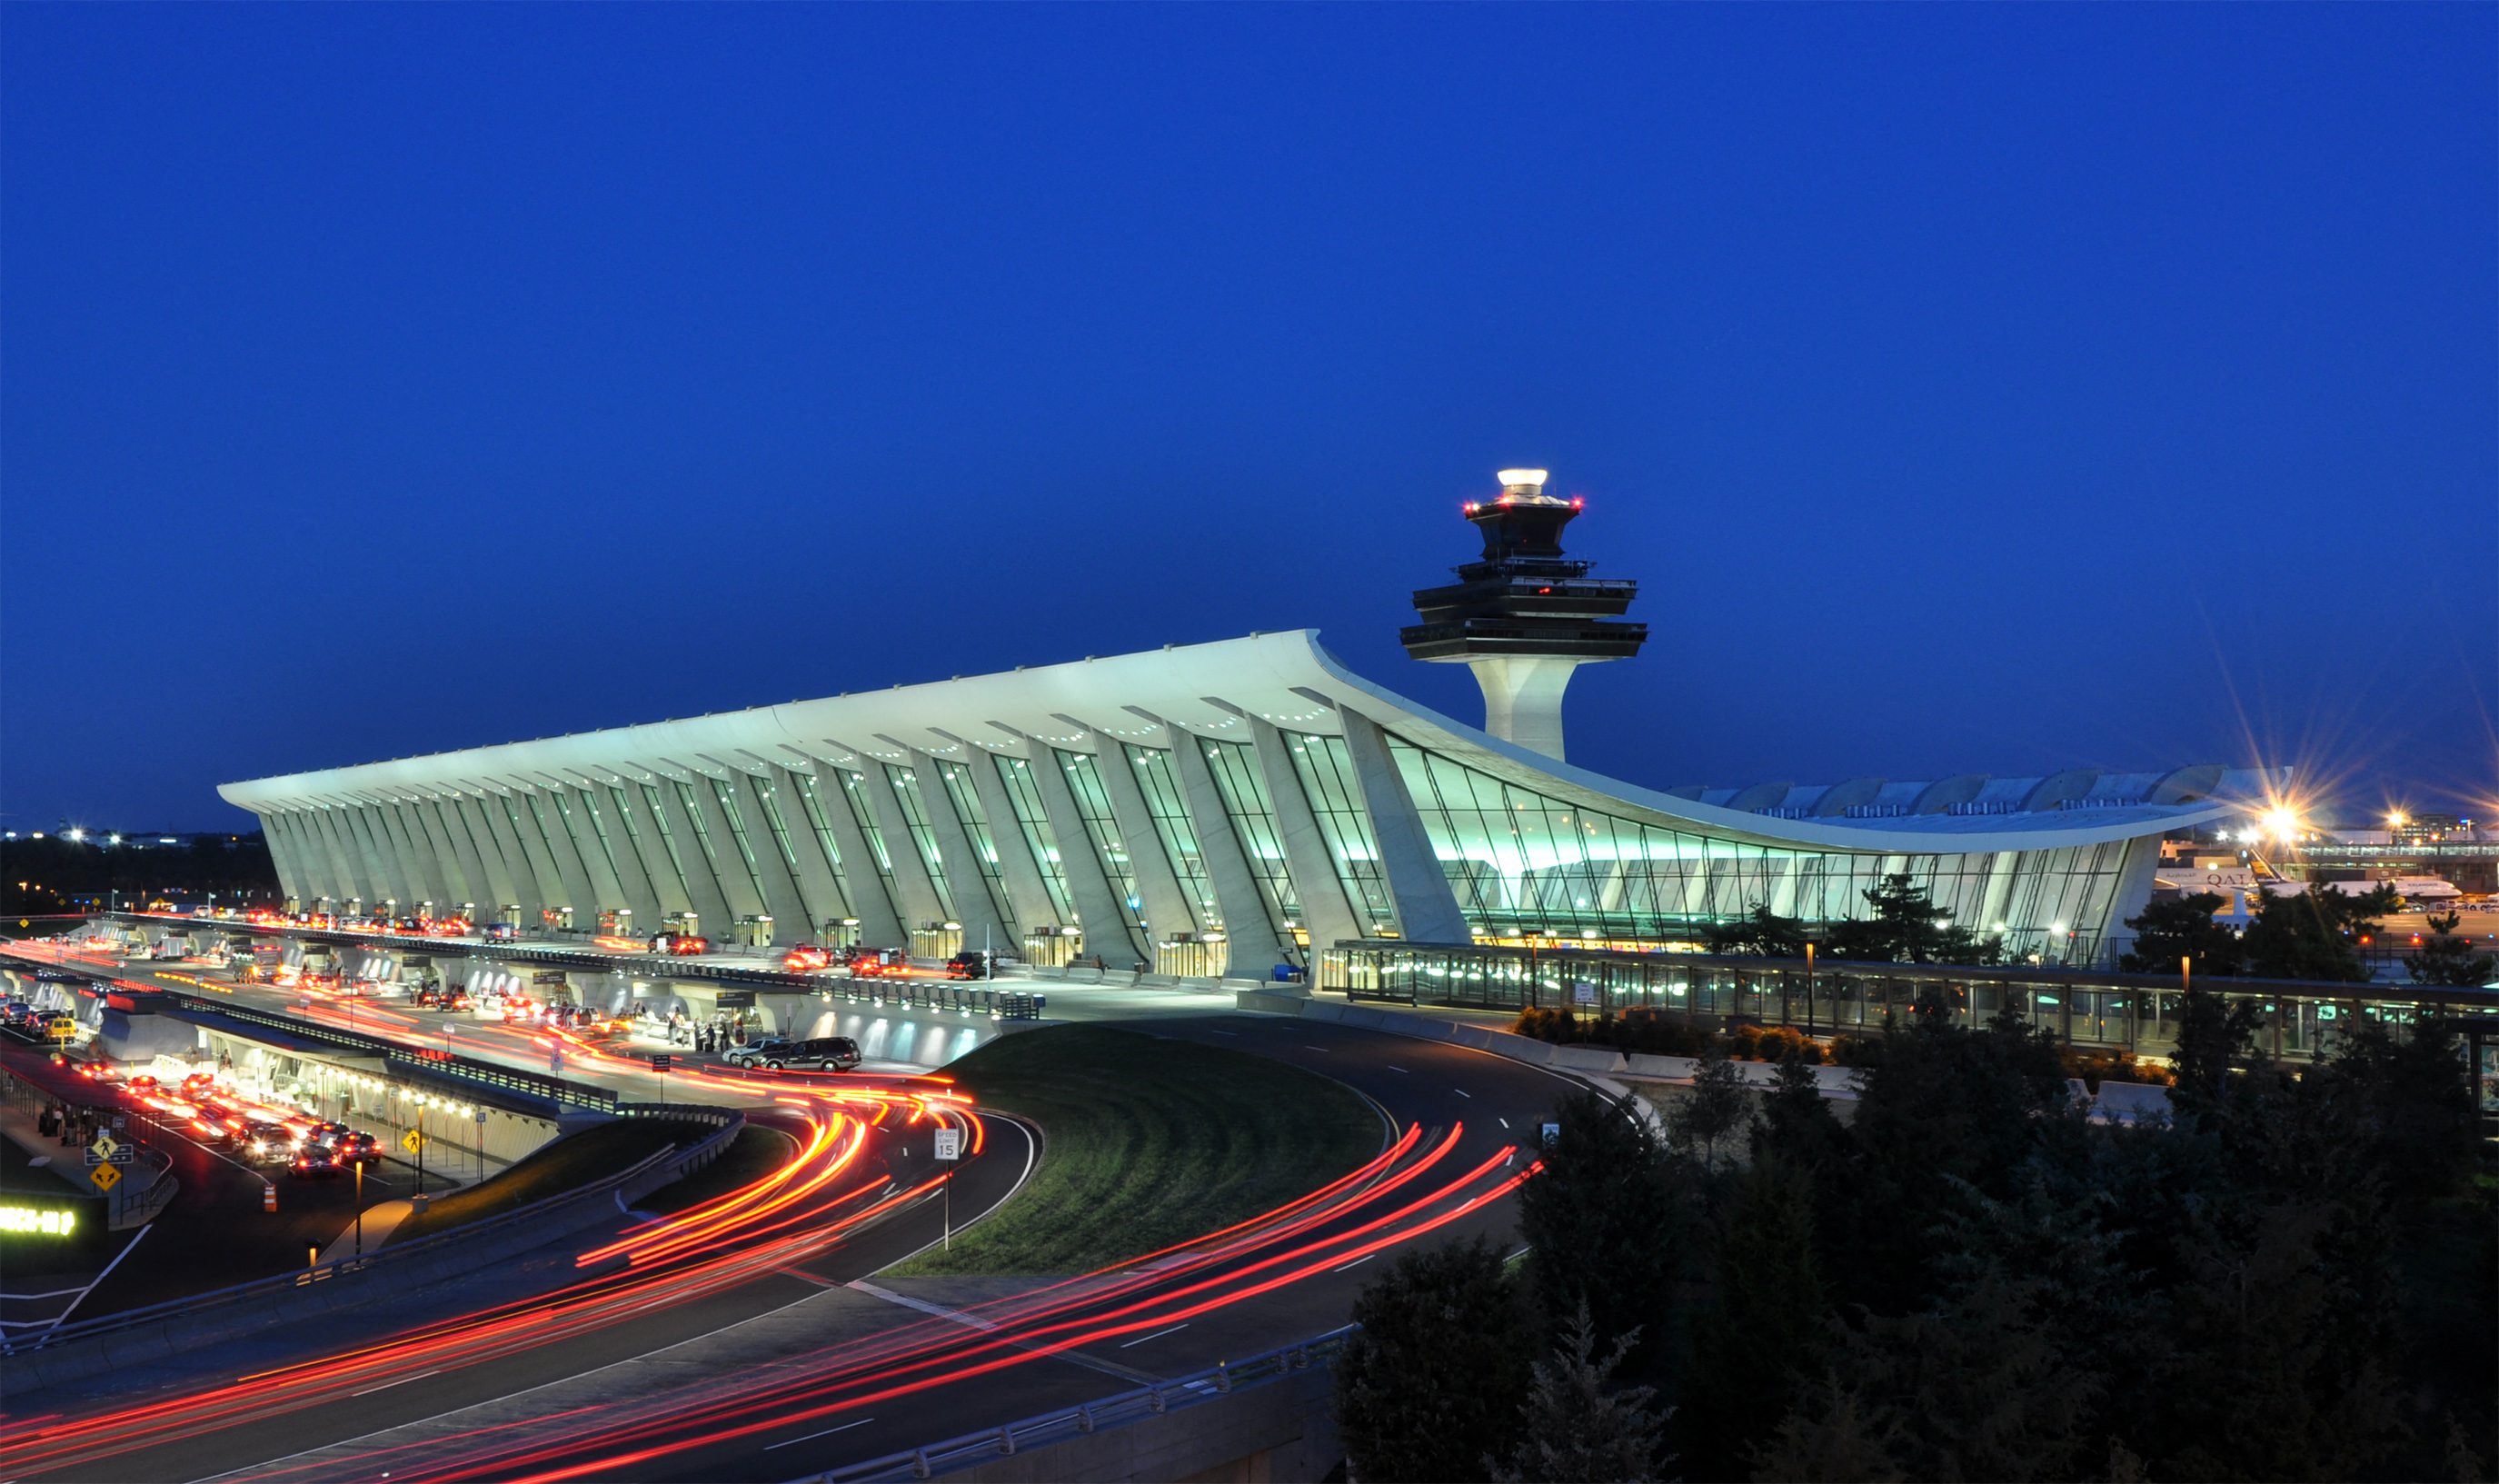 Easy access to Washington Dulles International Airport